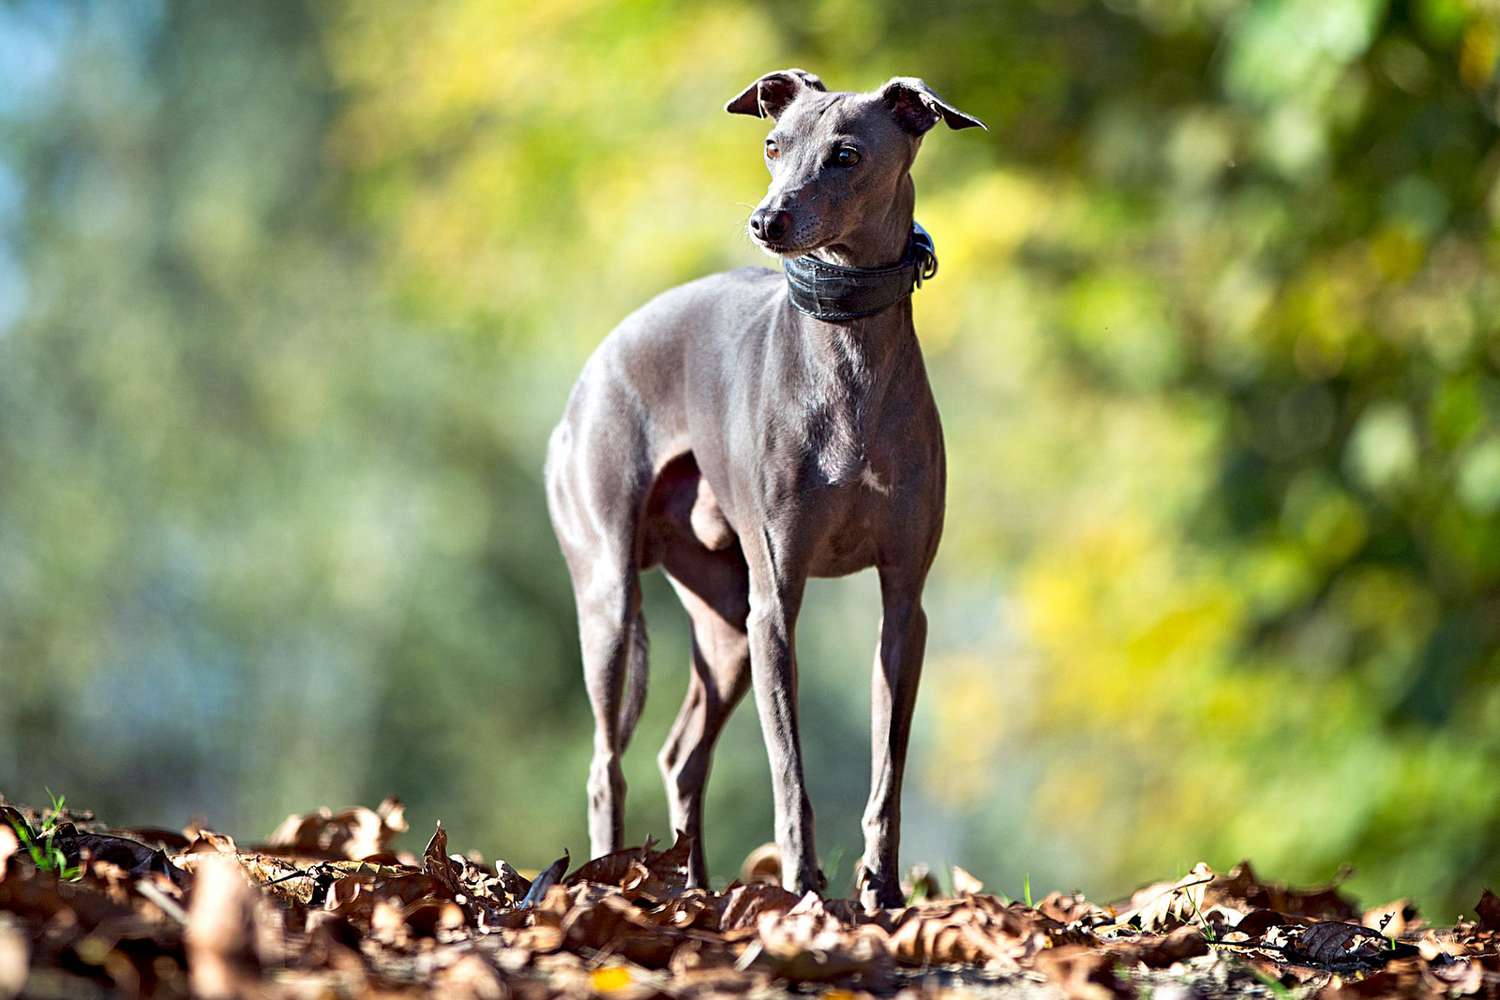 italian greyhound wearing a thick collar standing in fall leaves outside